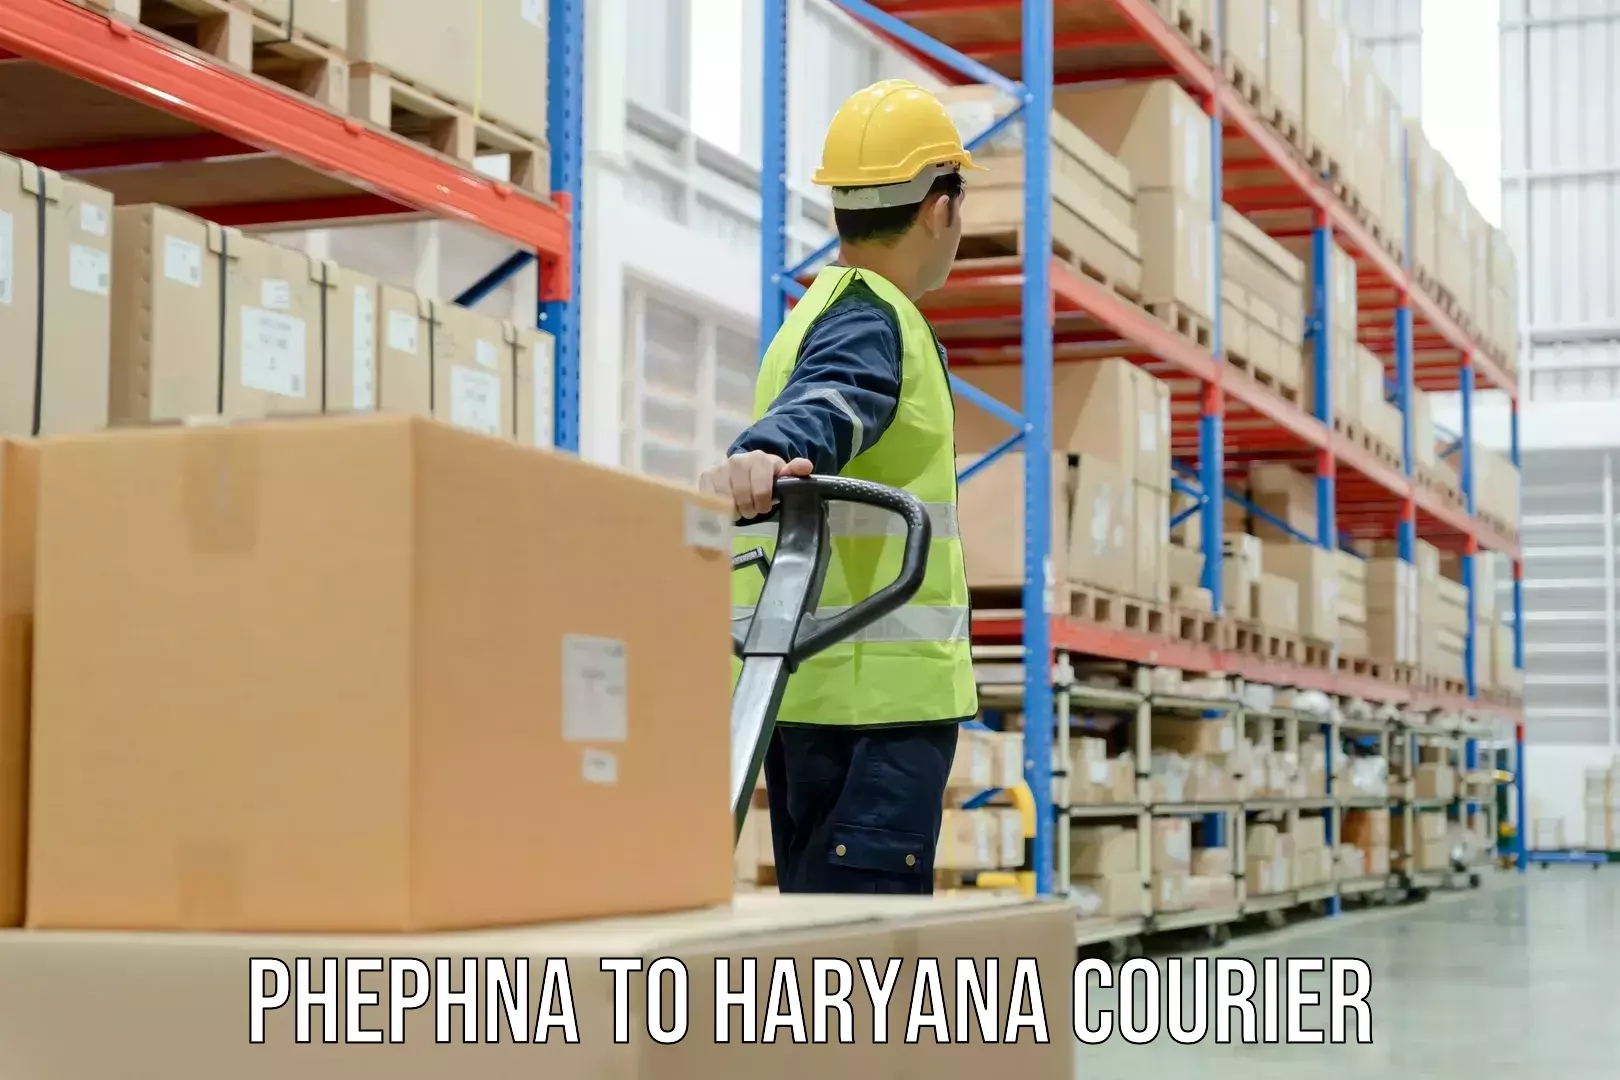 Multi-carrier shipping in Phephna to Odhan